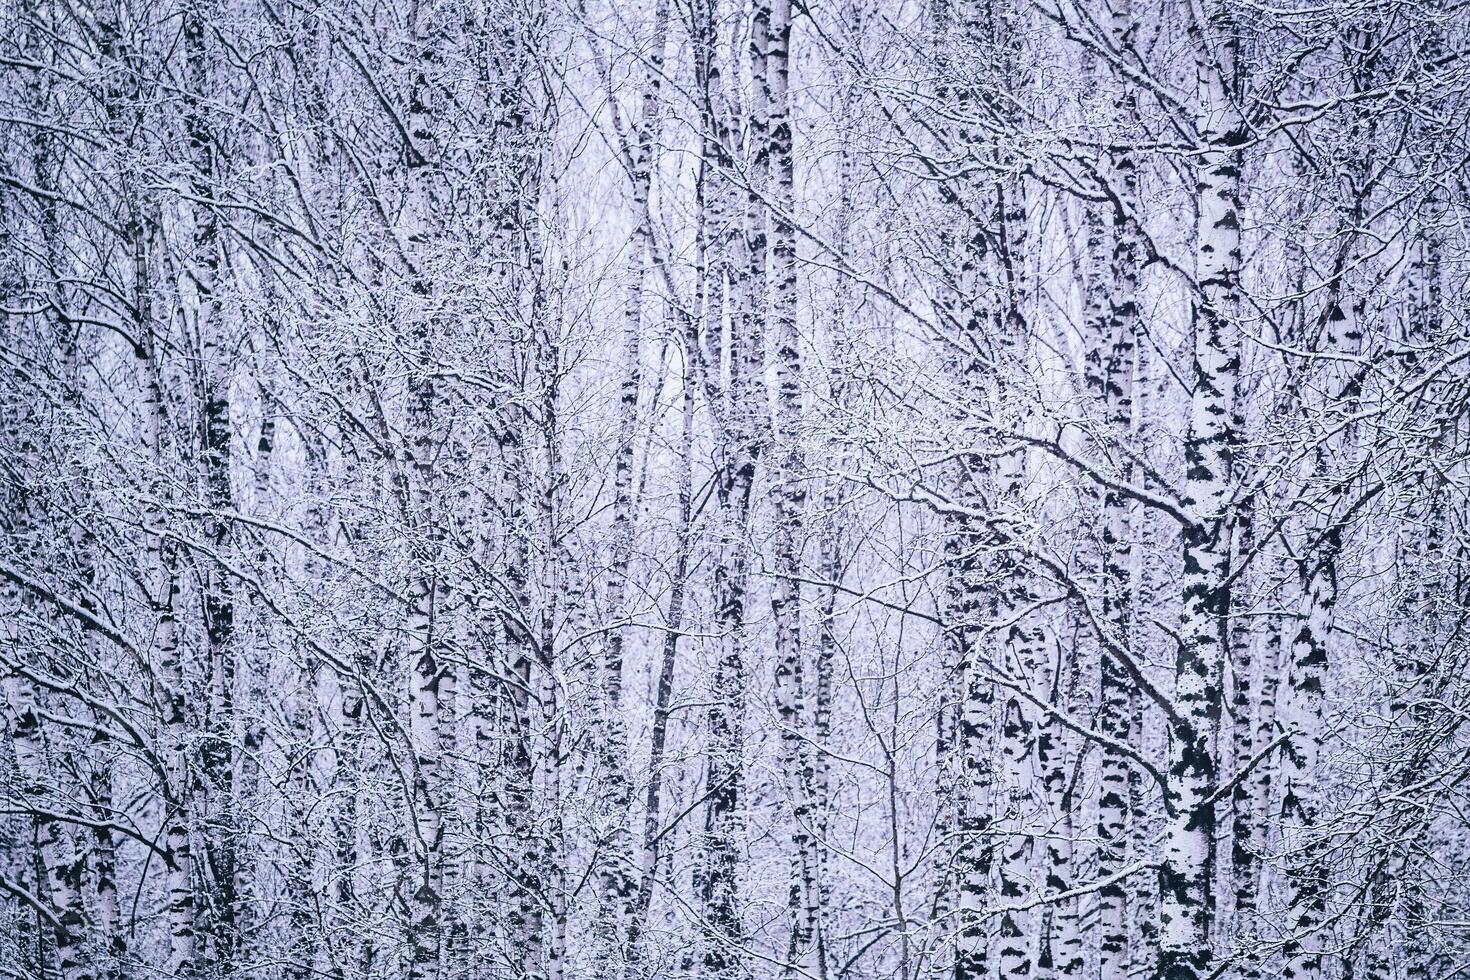 Birch grove after a snowfall on a winter day. Birch branches covered with snow. Vintage film aesthetic. photo